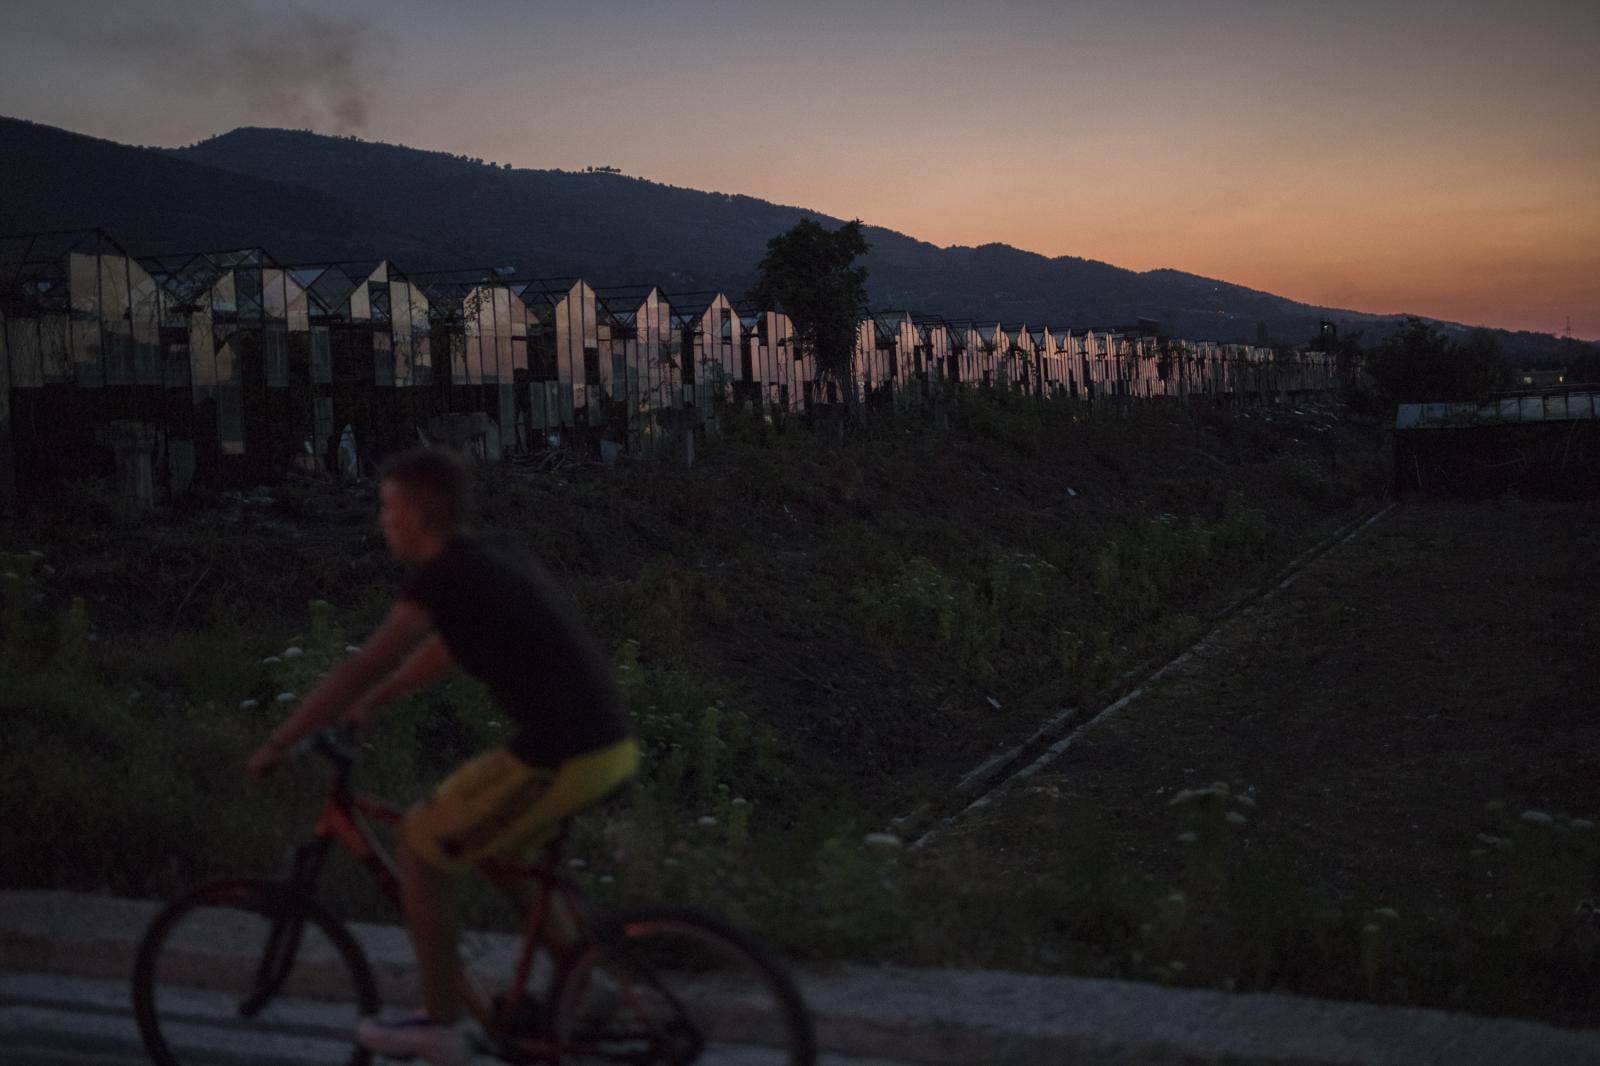 Albania Unemployment - A boy rides a bicycle at sunset in the rural town of...